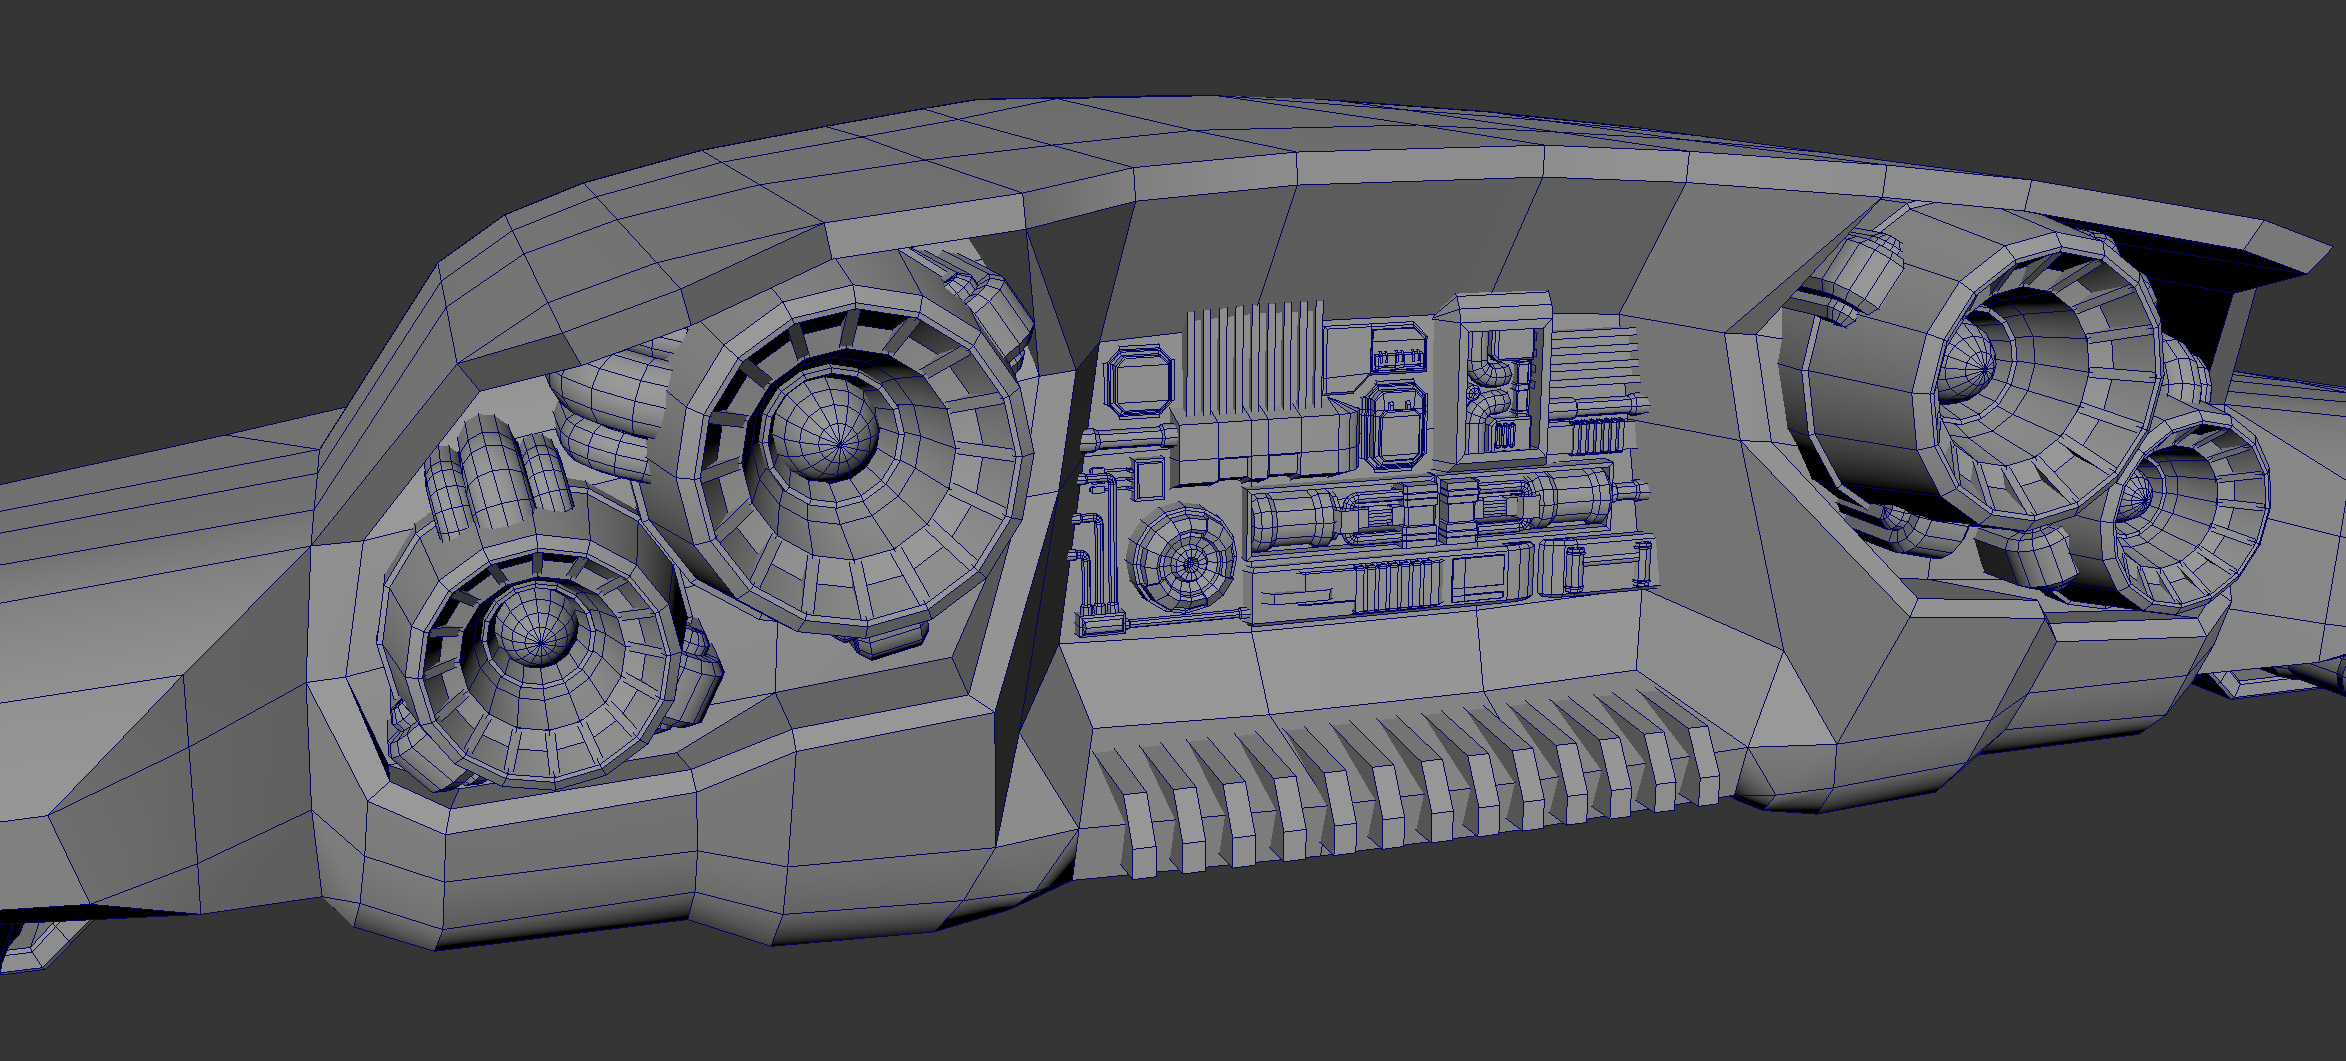 Parallax detail in a mesh showing complex mechanical parts and engines outtakes for the star fighter